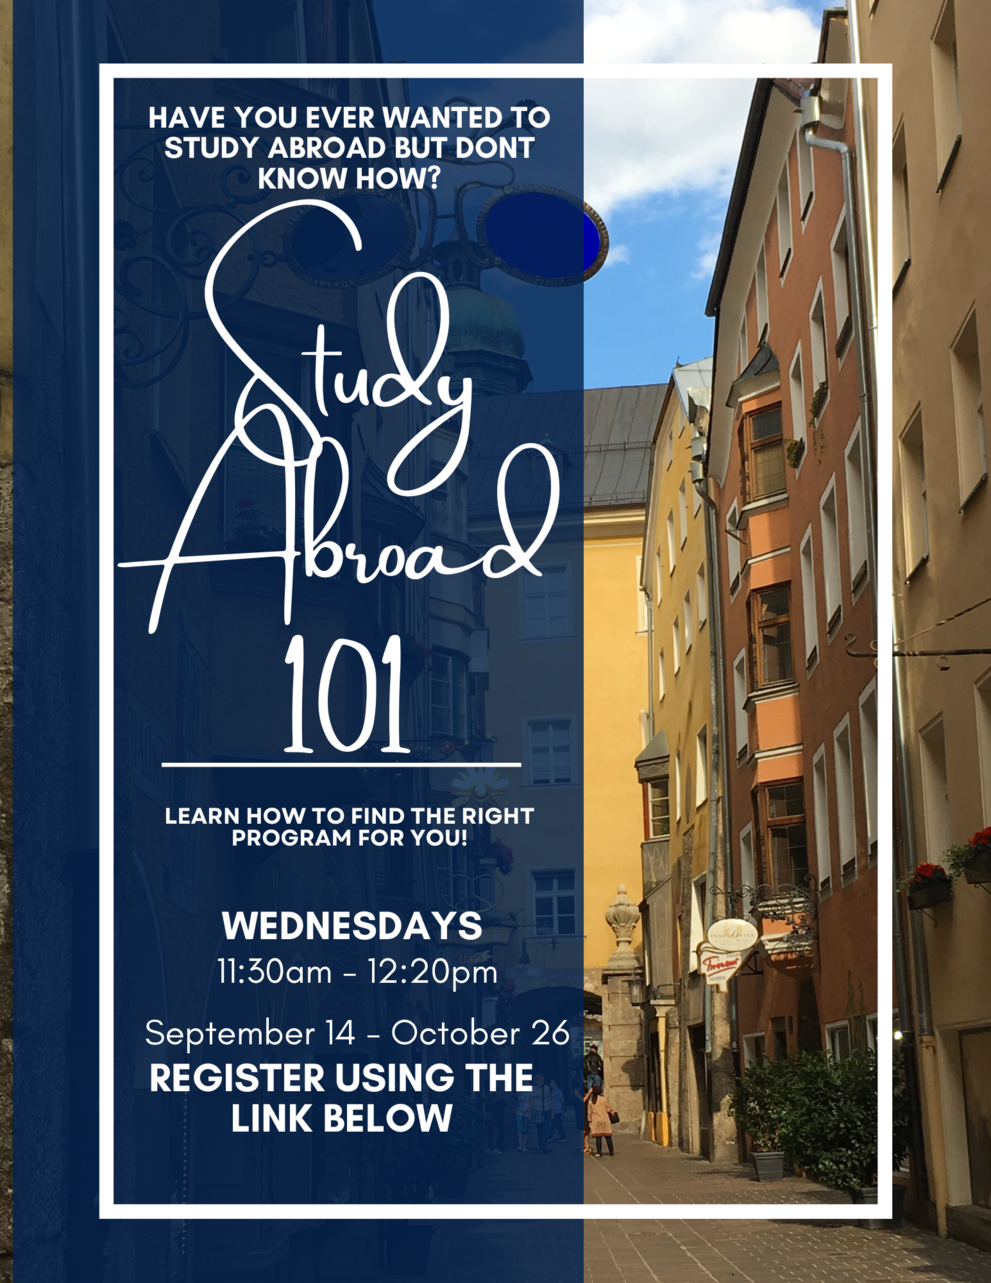 Study Abroad 101 Information Session, Wednesdays 11:30am-12:20pm, 9/14-10/26